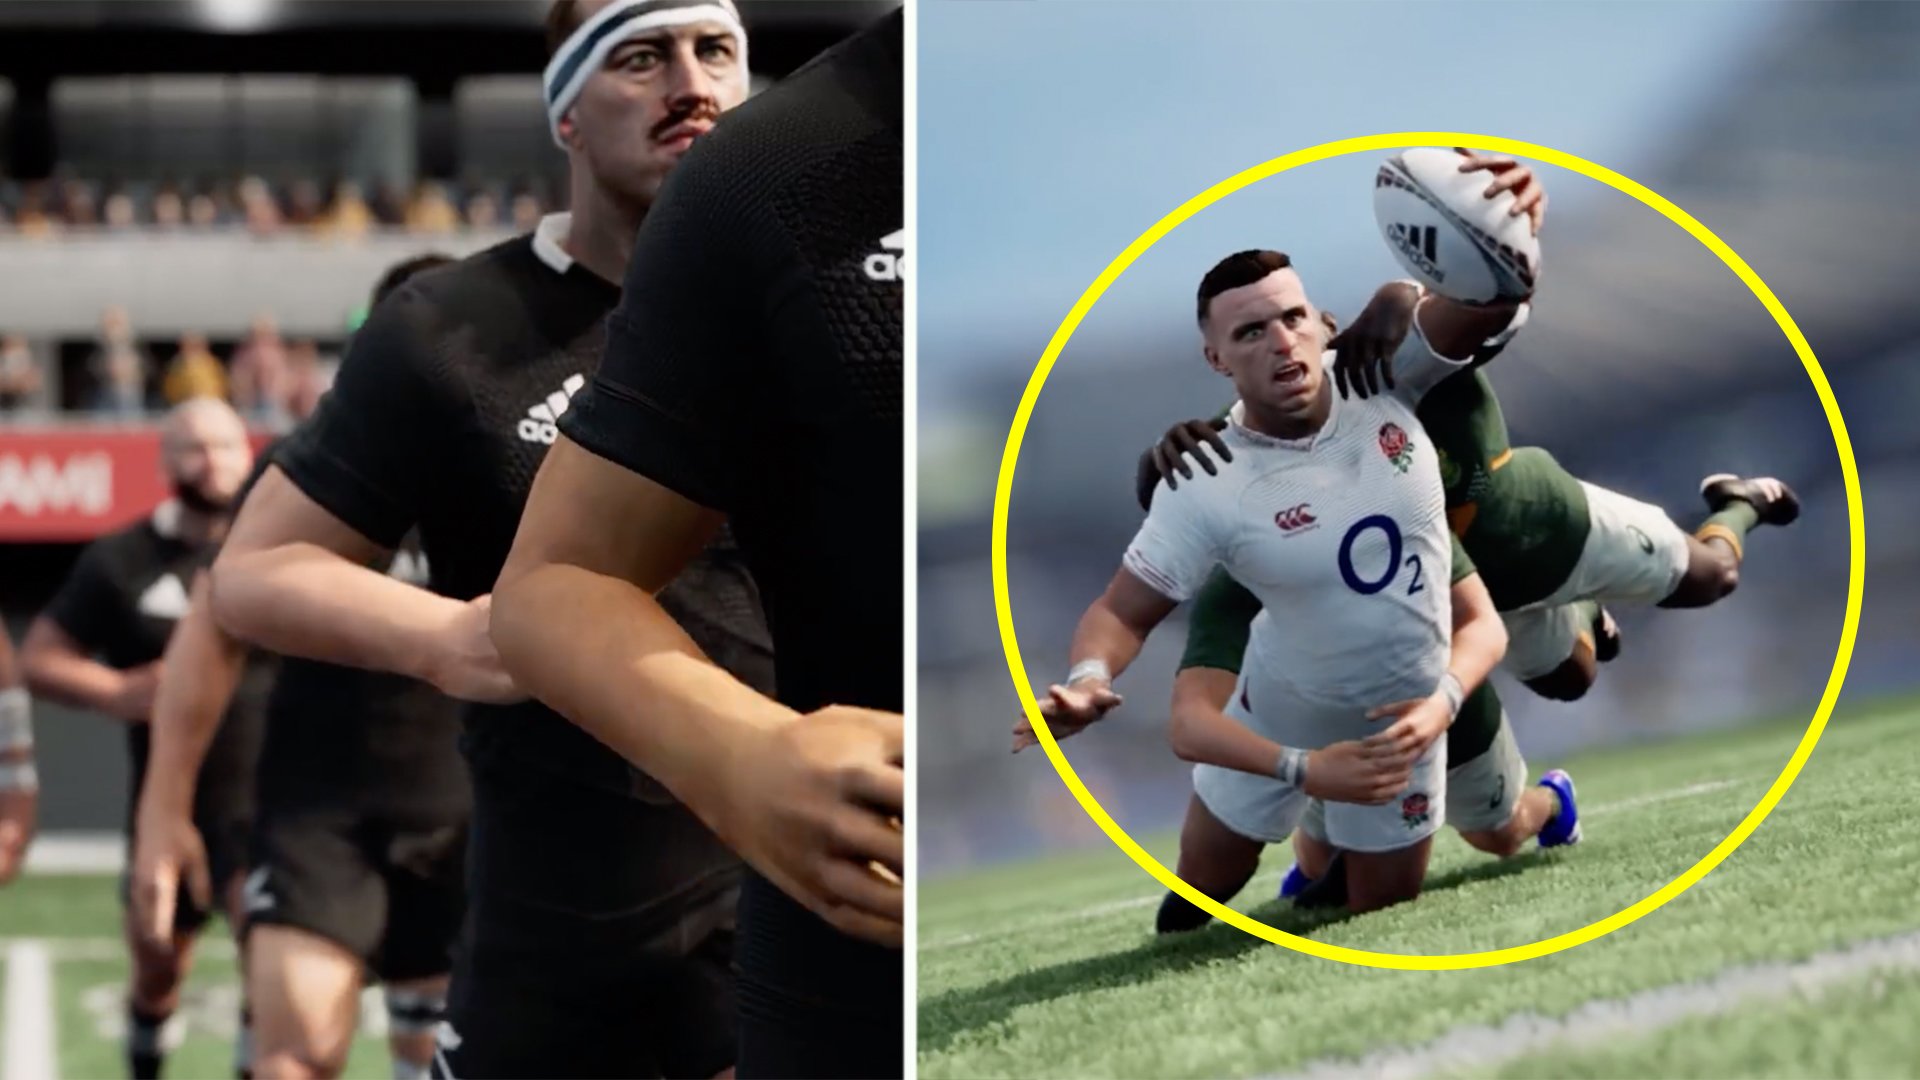 Brilliant teaser trailer has fans hoping that a good rugby game is about to be released